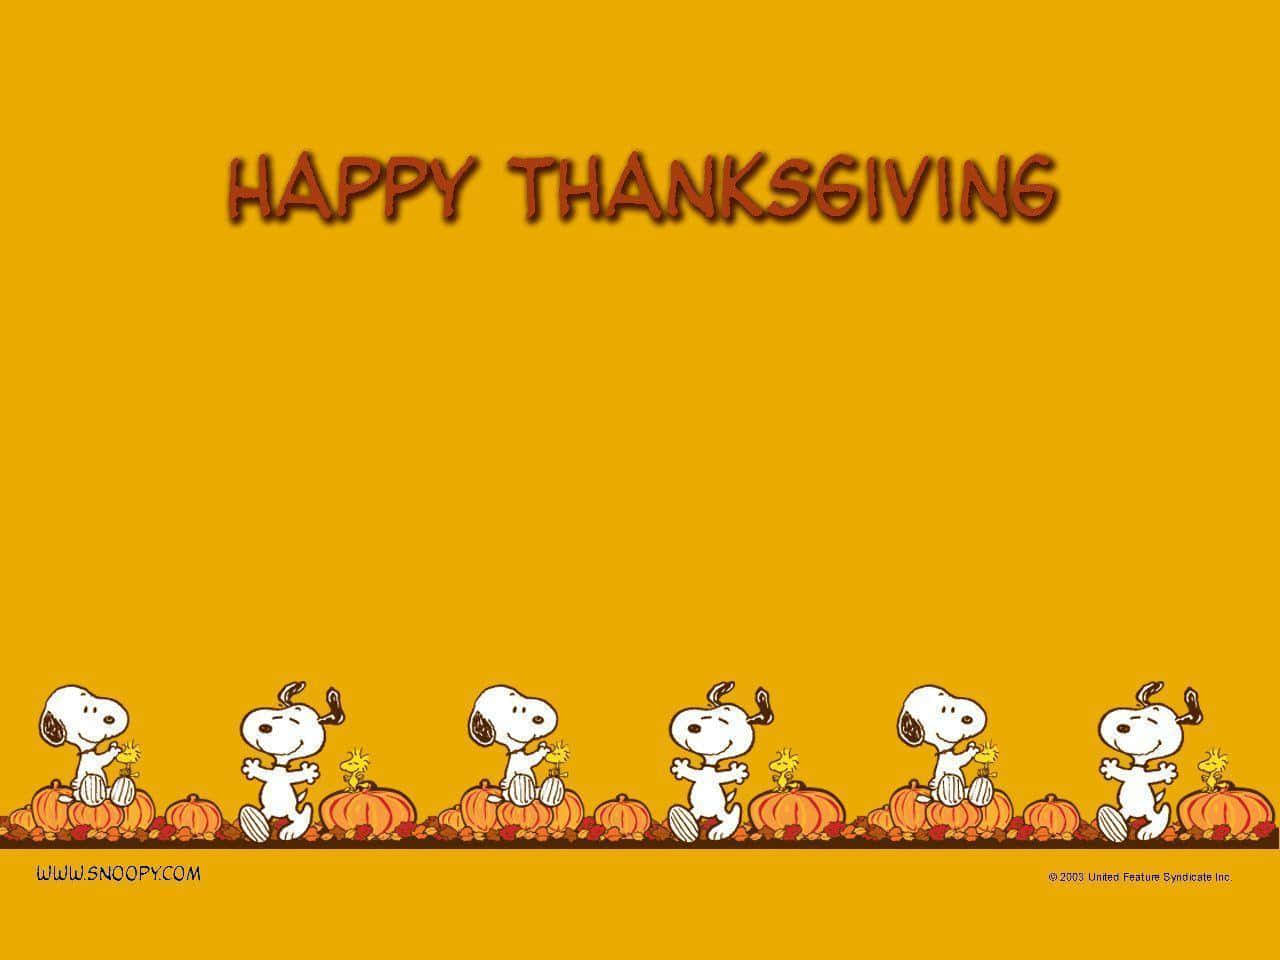 Celebrate Thanksgiving With Snoopy! Background